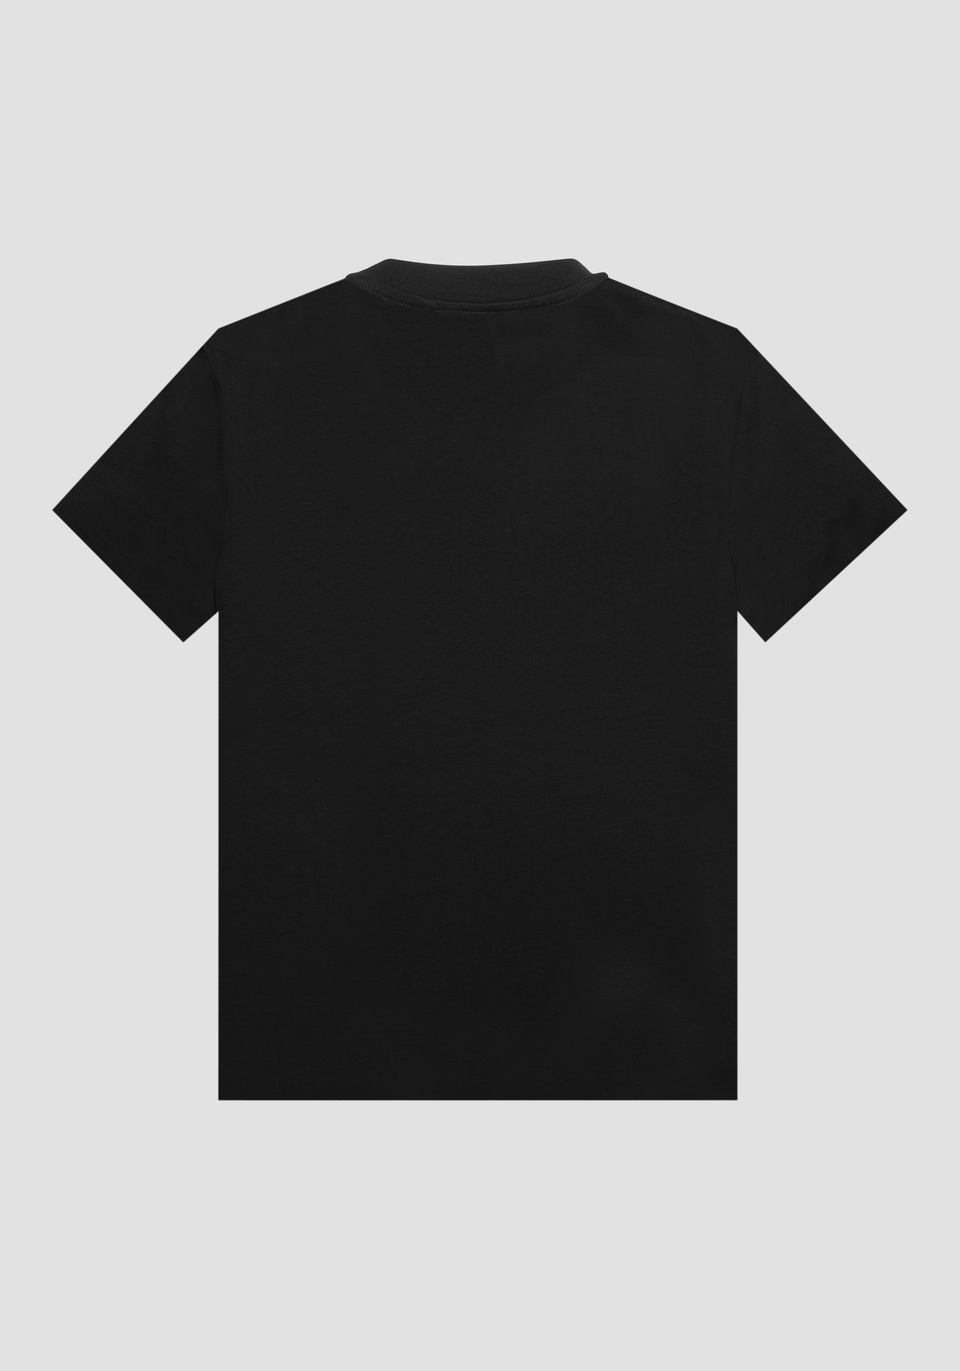 SLIM FIT T-SHIRT IN 100% COTTON WITH LOGO PRINT - Antony Morato Online Shop